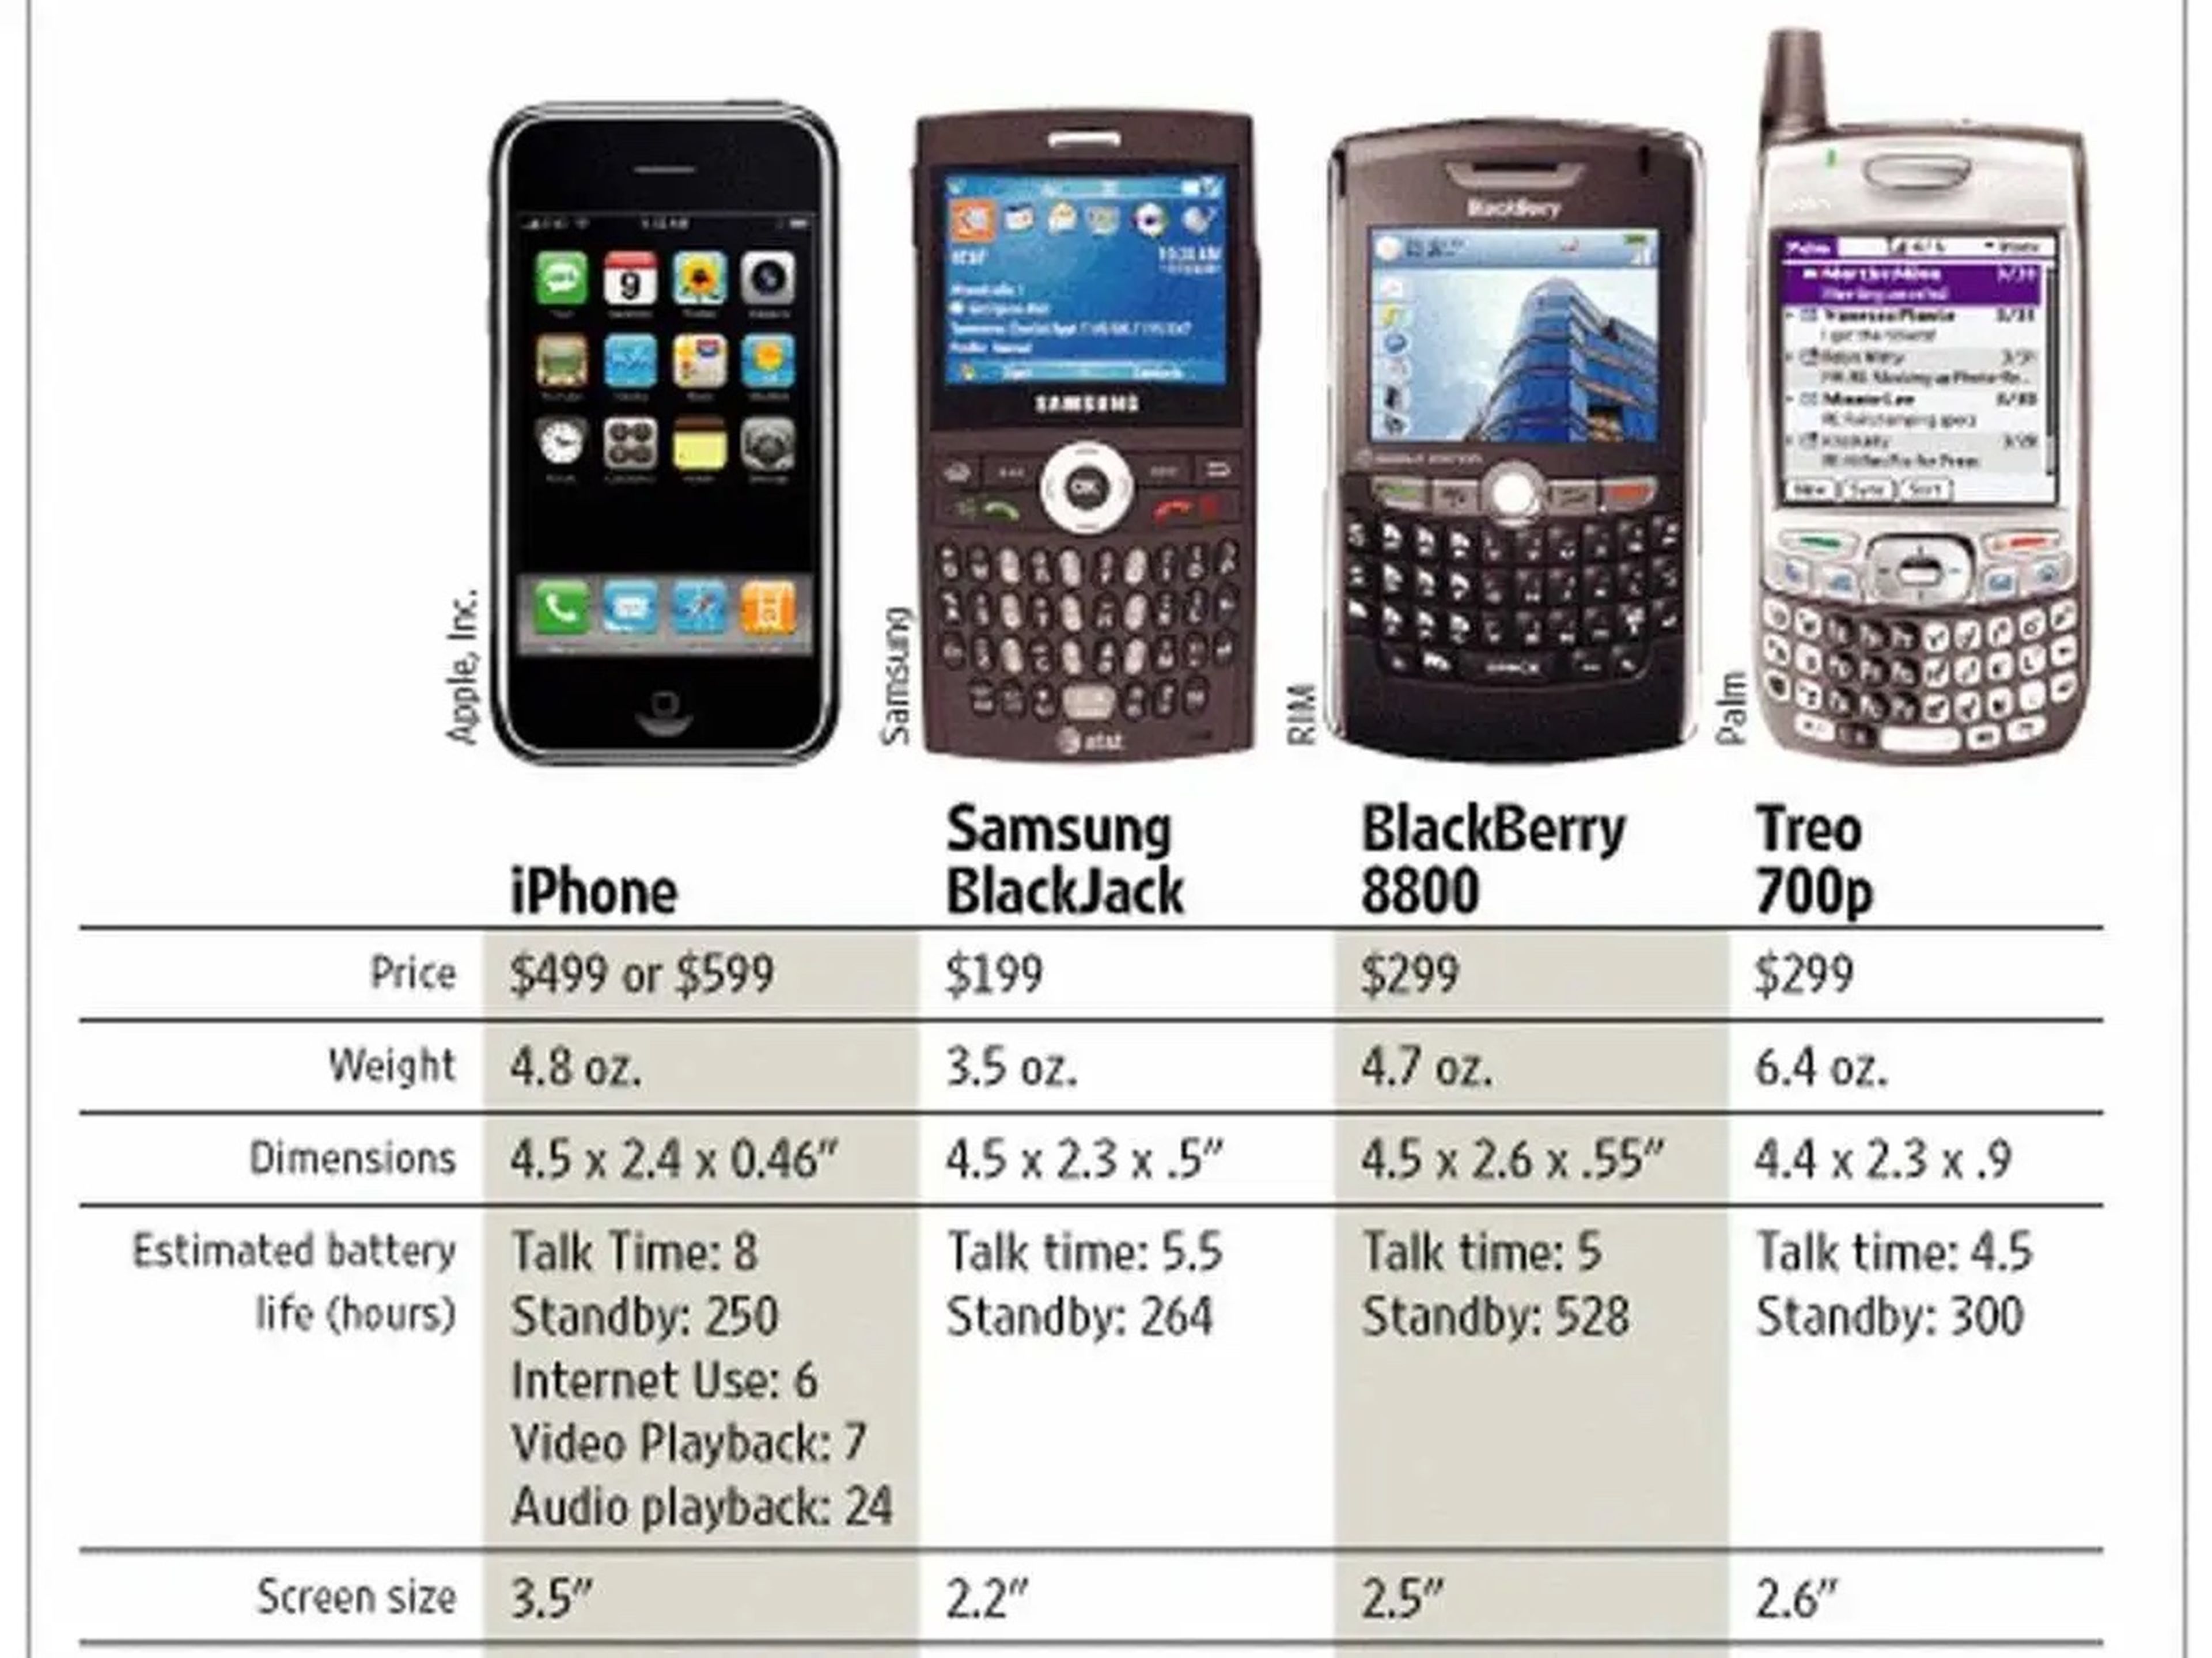 Something The First Iphone And The Modern Iphone Share: An Incredibly High Price.  Wsj